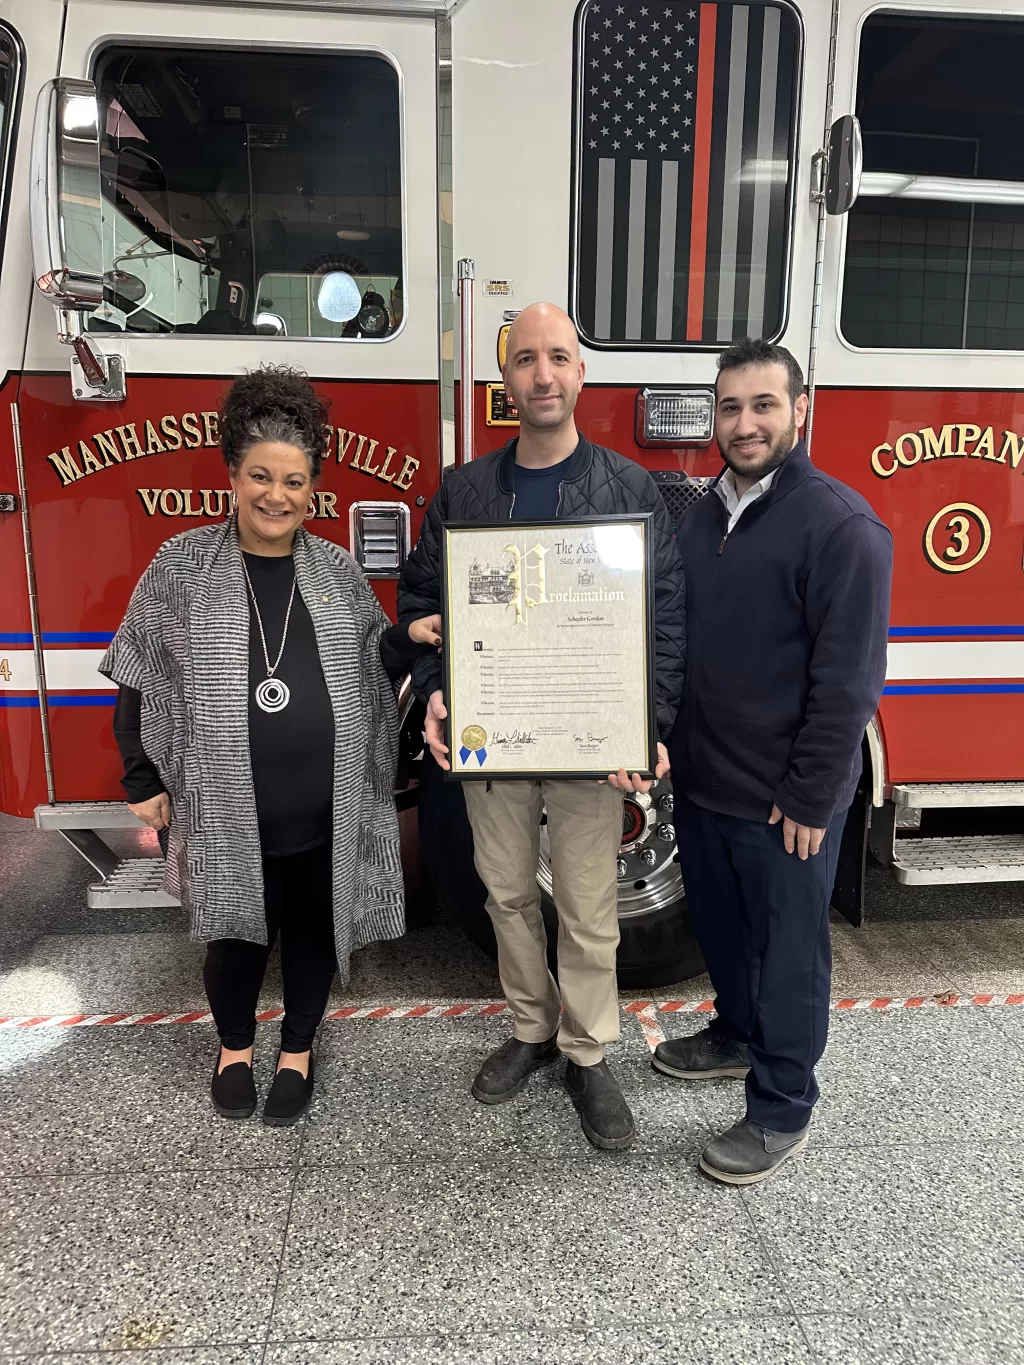 (Photo: Office of NYS Assemblywoman Gina Sillitti) NYS Assemblywoman Gina Sillitti (left) joins Assemblyman Sam Berger (right) to present a proclamation to firefighter Schuyler Gordon (center) for his bravery and selflessness in service to others.